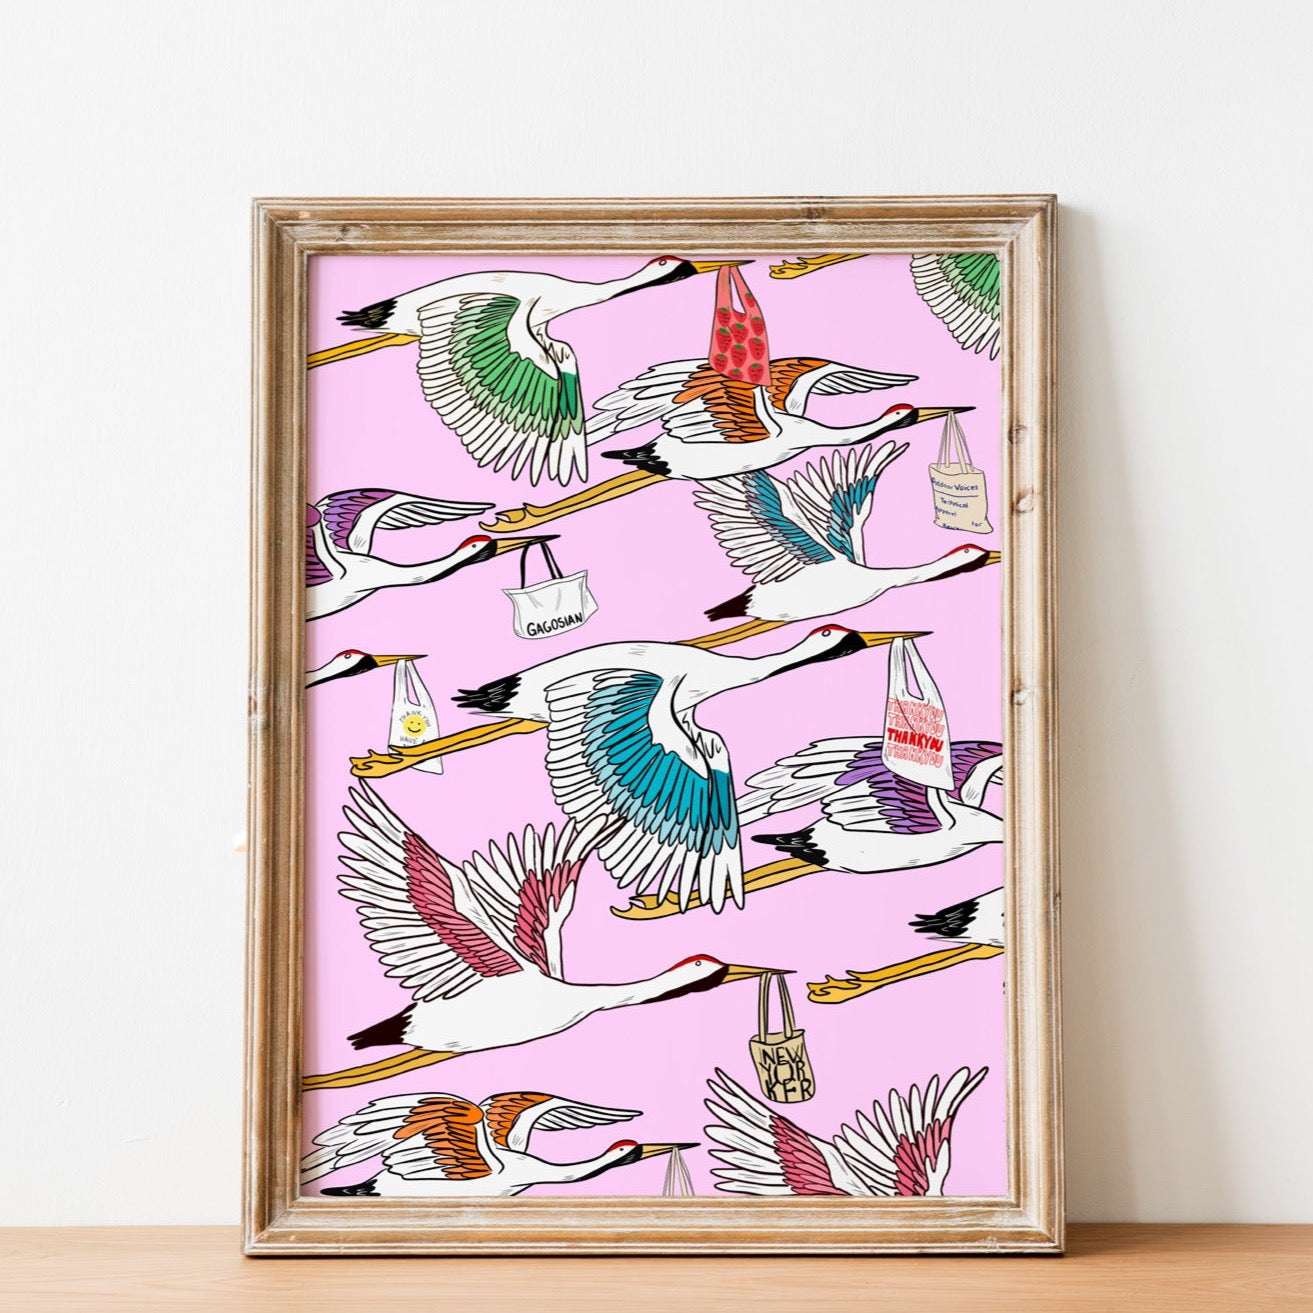 Crane "The Morning Commute" Illustrated Wall Art Print